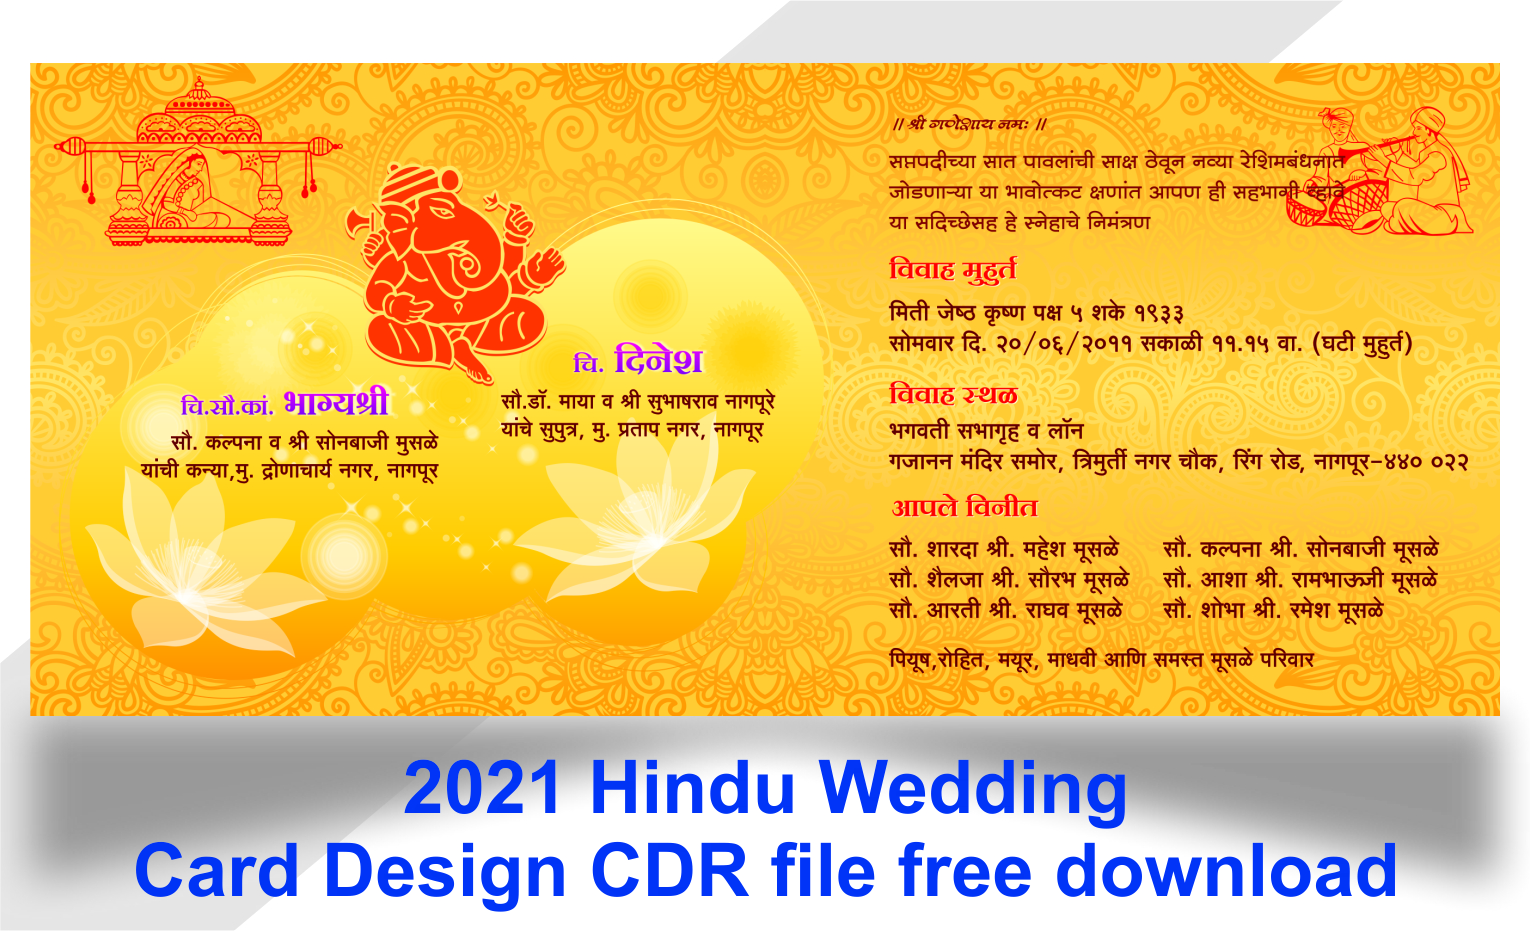 2021 Hindu Wedding Card Design Cdr File Free Download Ar Graphics Ar Graphics Free Cdr Psd Websites For Graphic Design